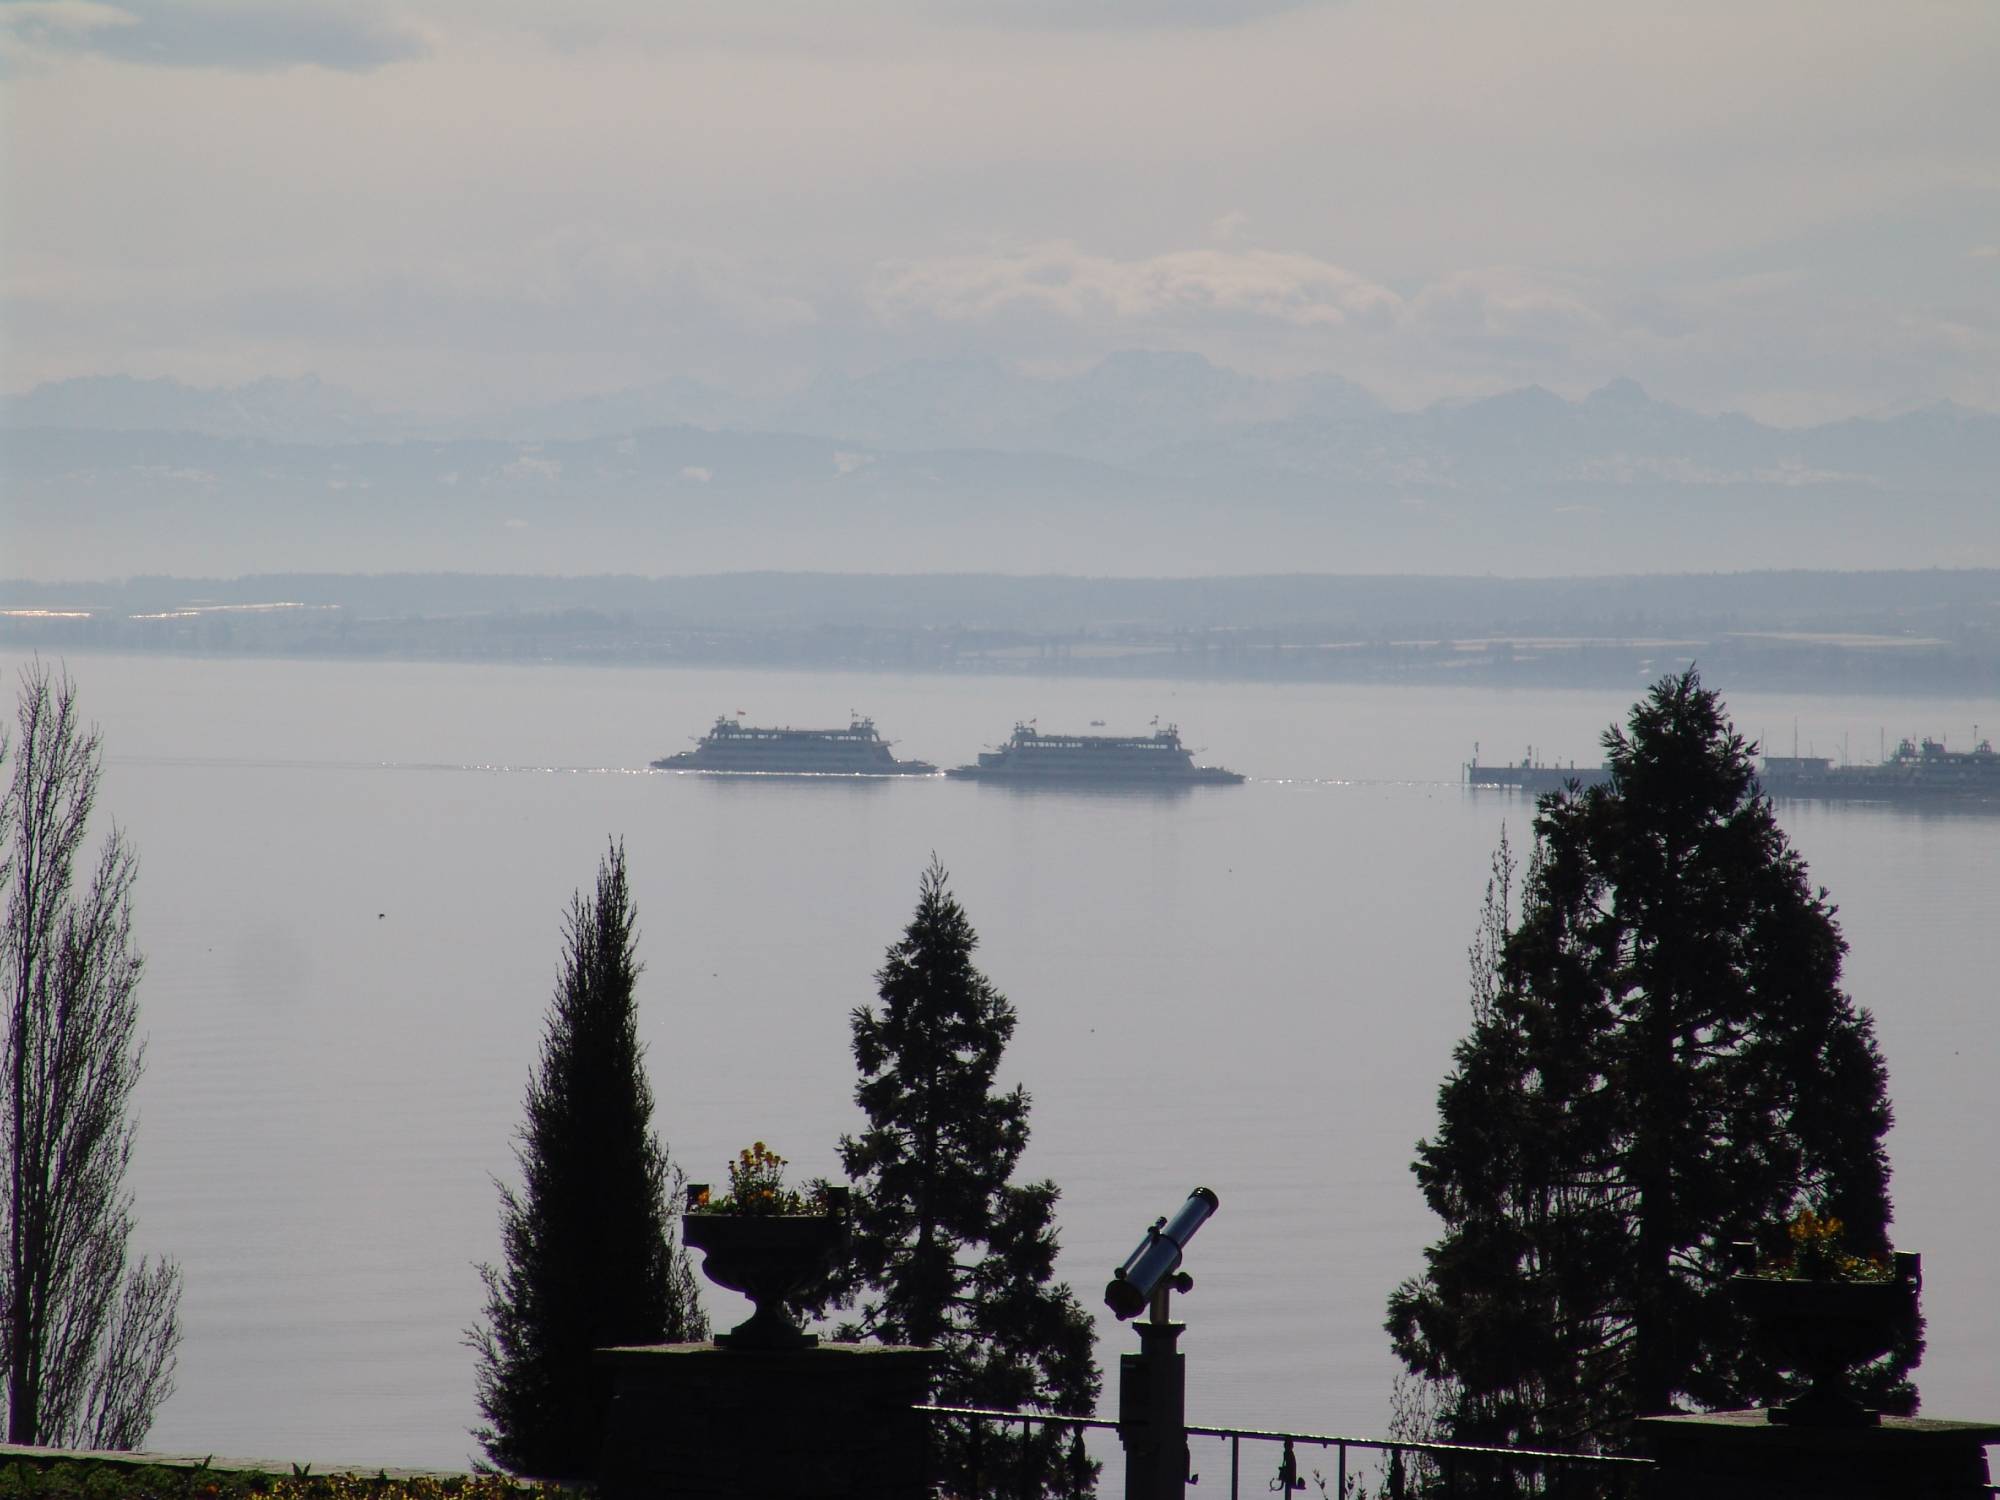 Lake Bodensee - ferries passing